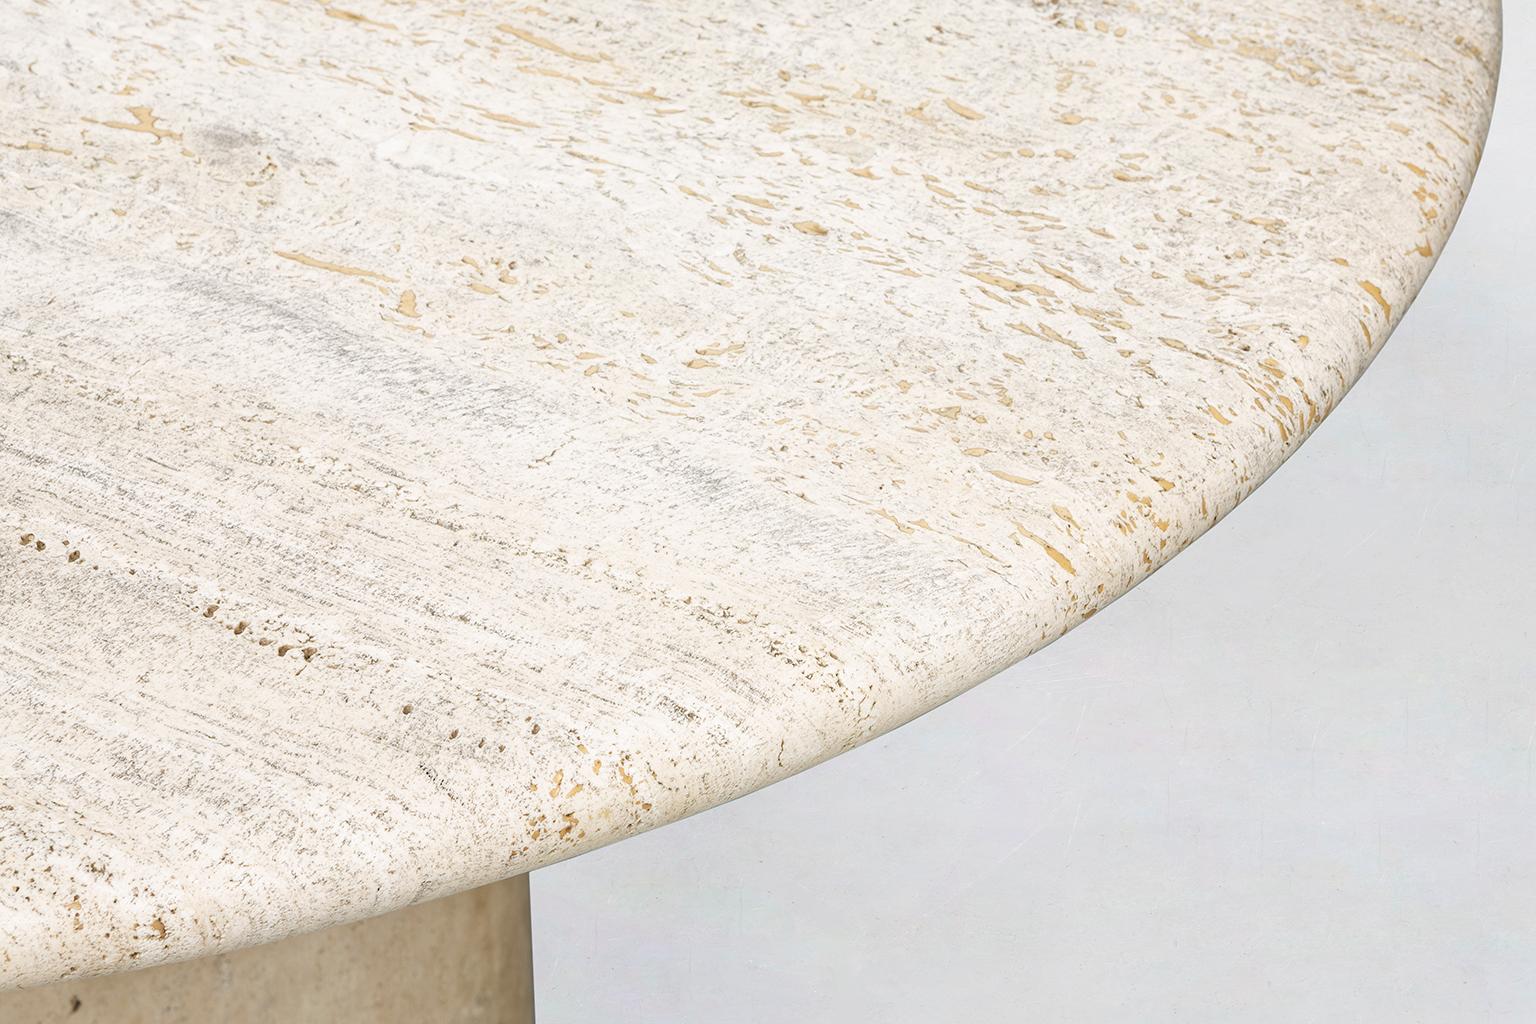 Late 20th Century Italian Mid-Century Modern Travertine Dining Table Dolmen by Cappellini, 1970s